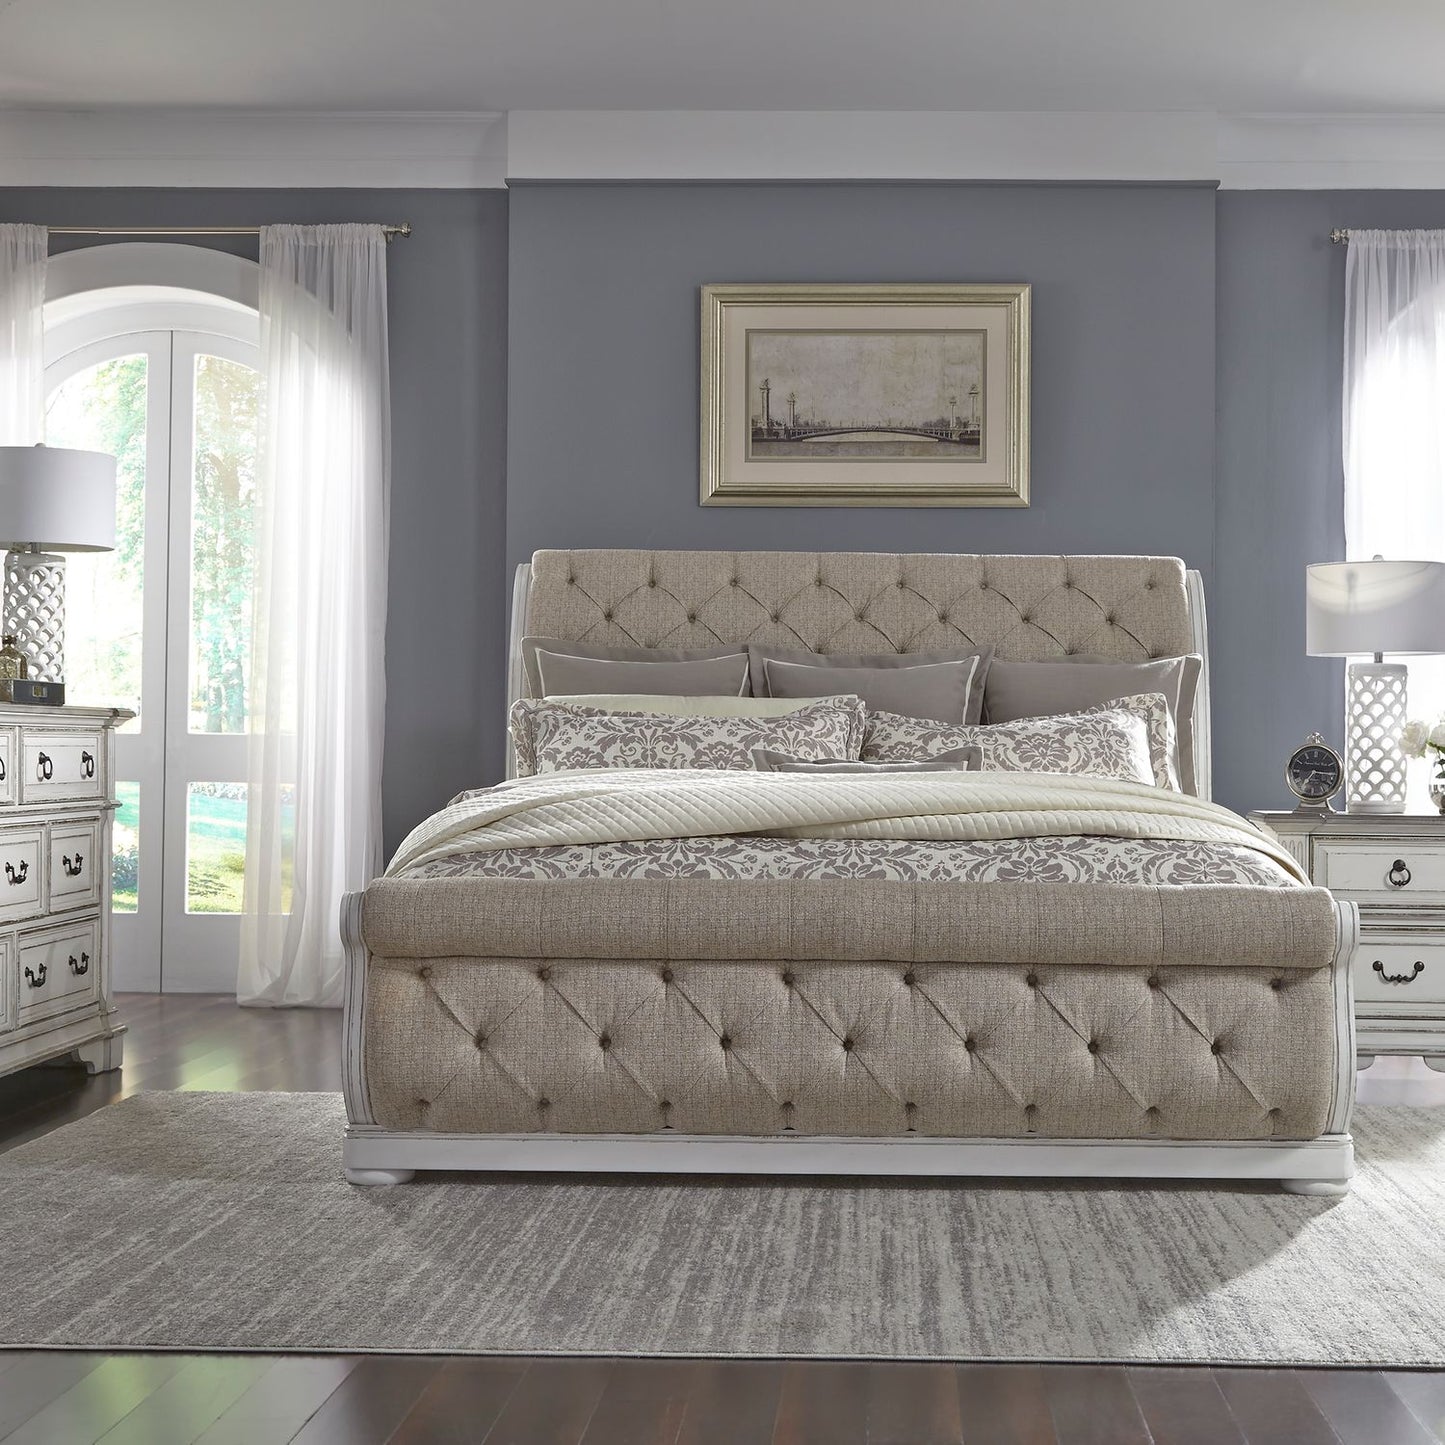 Abbey Park - King Uph Sleigh Bed, Dresser & Mirror, Night Stand